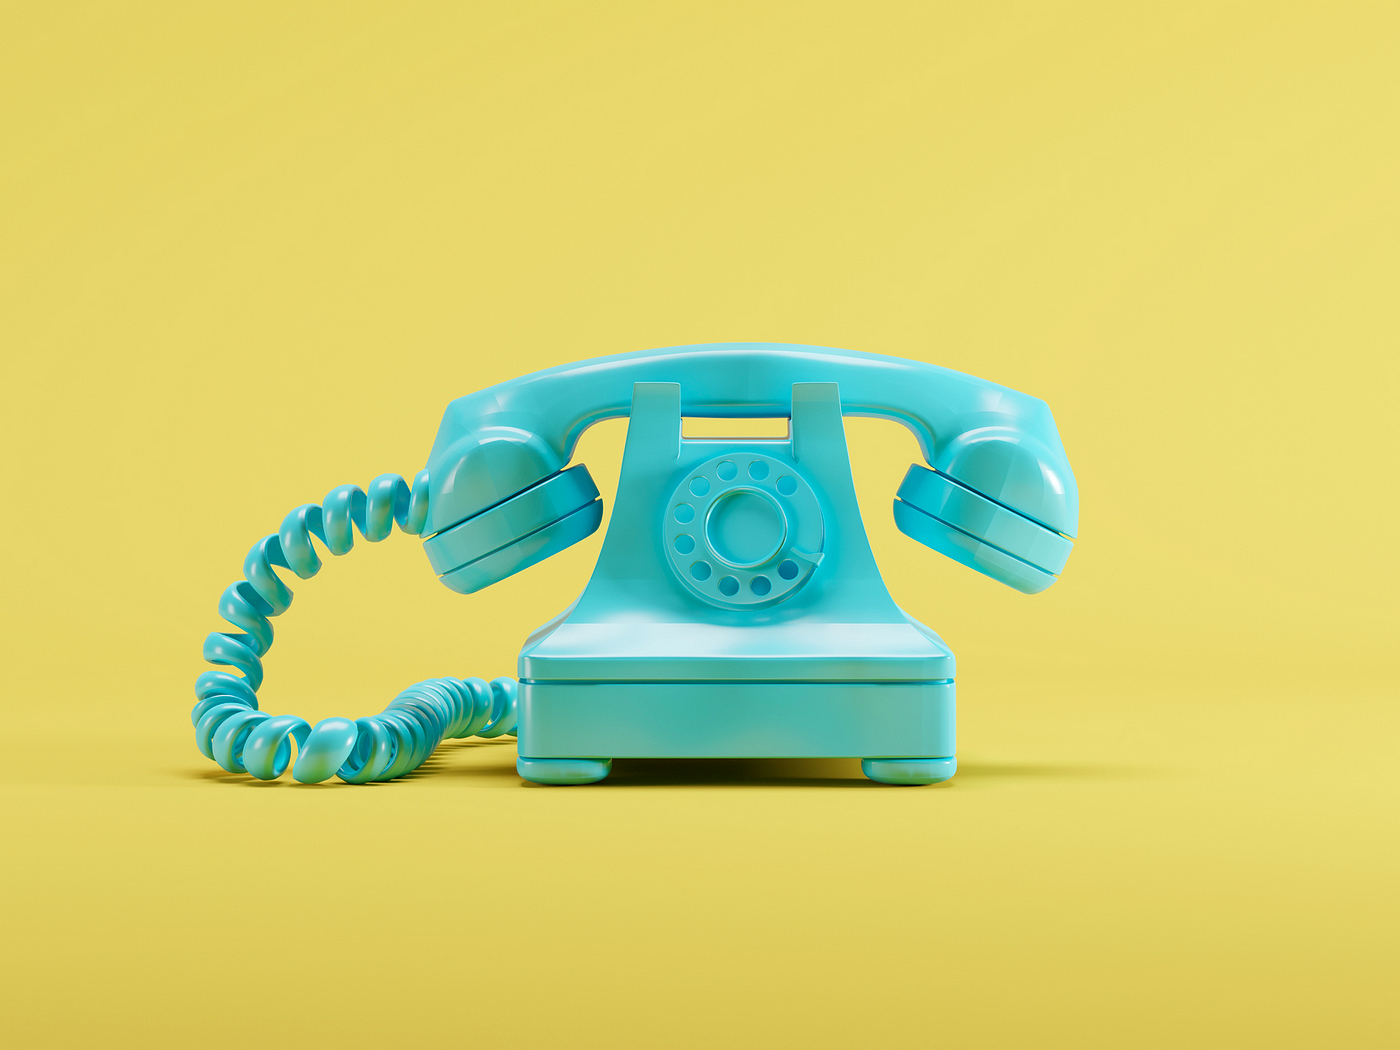 A photo of a teal old-fashioned phone against a yellow background.